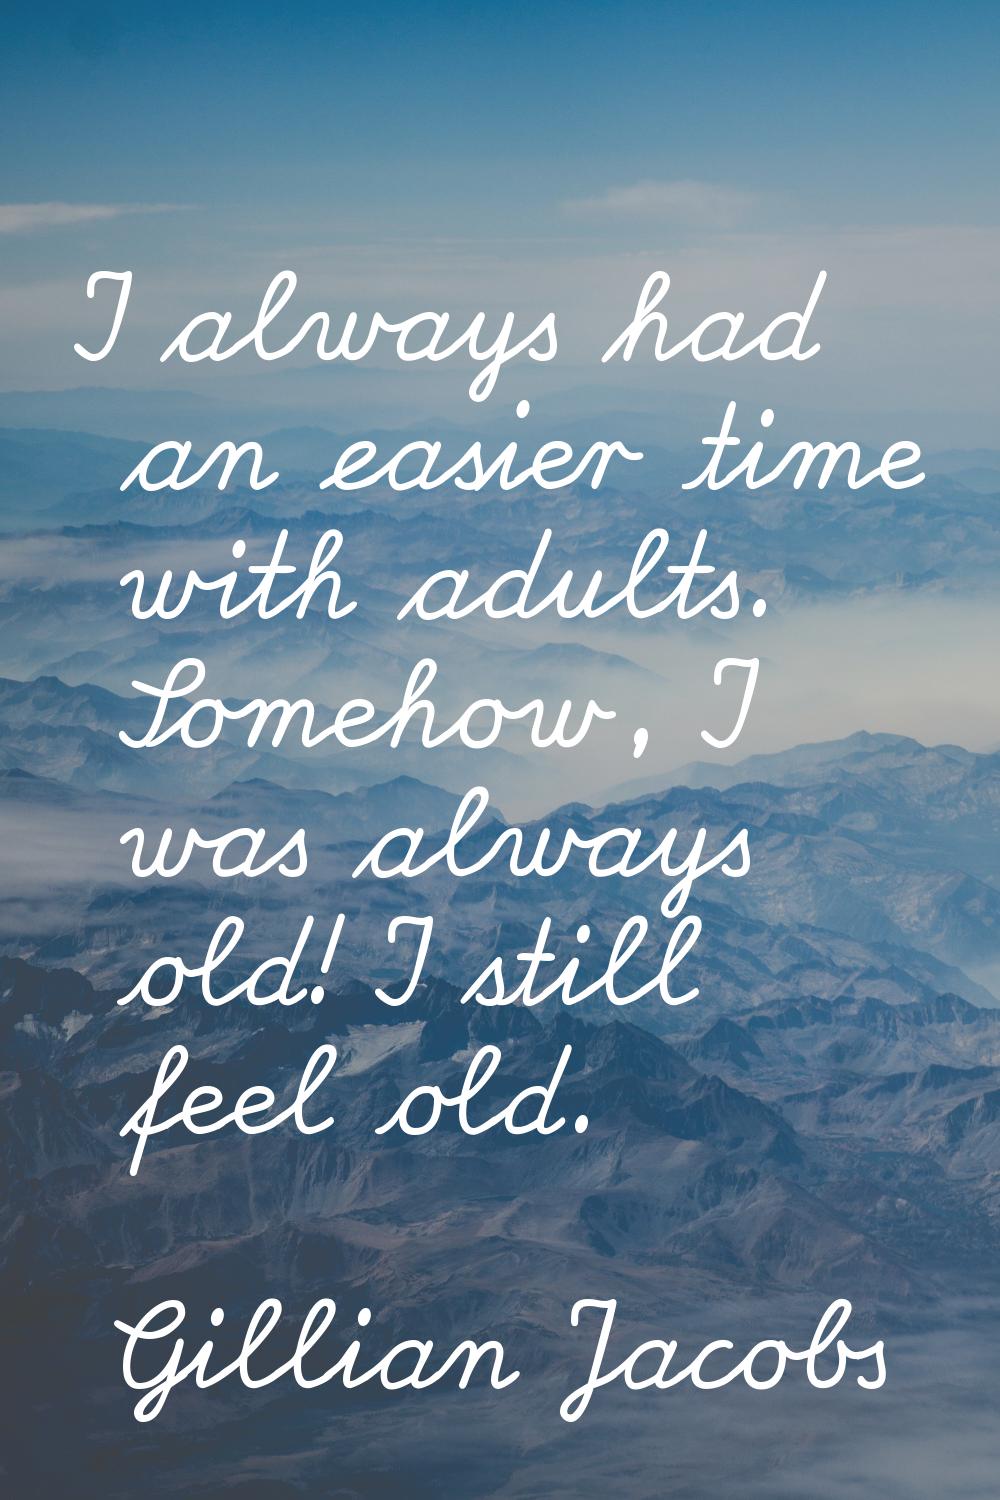 I always had an easier time with adults. Somehow, I was always old! I still feel old.